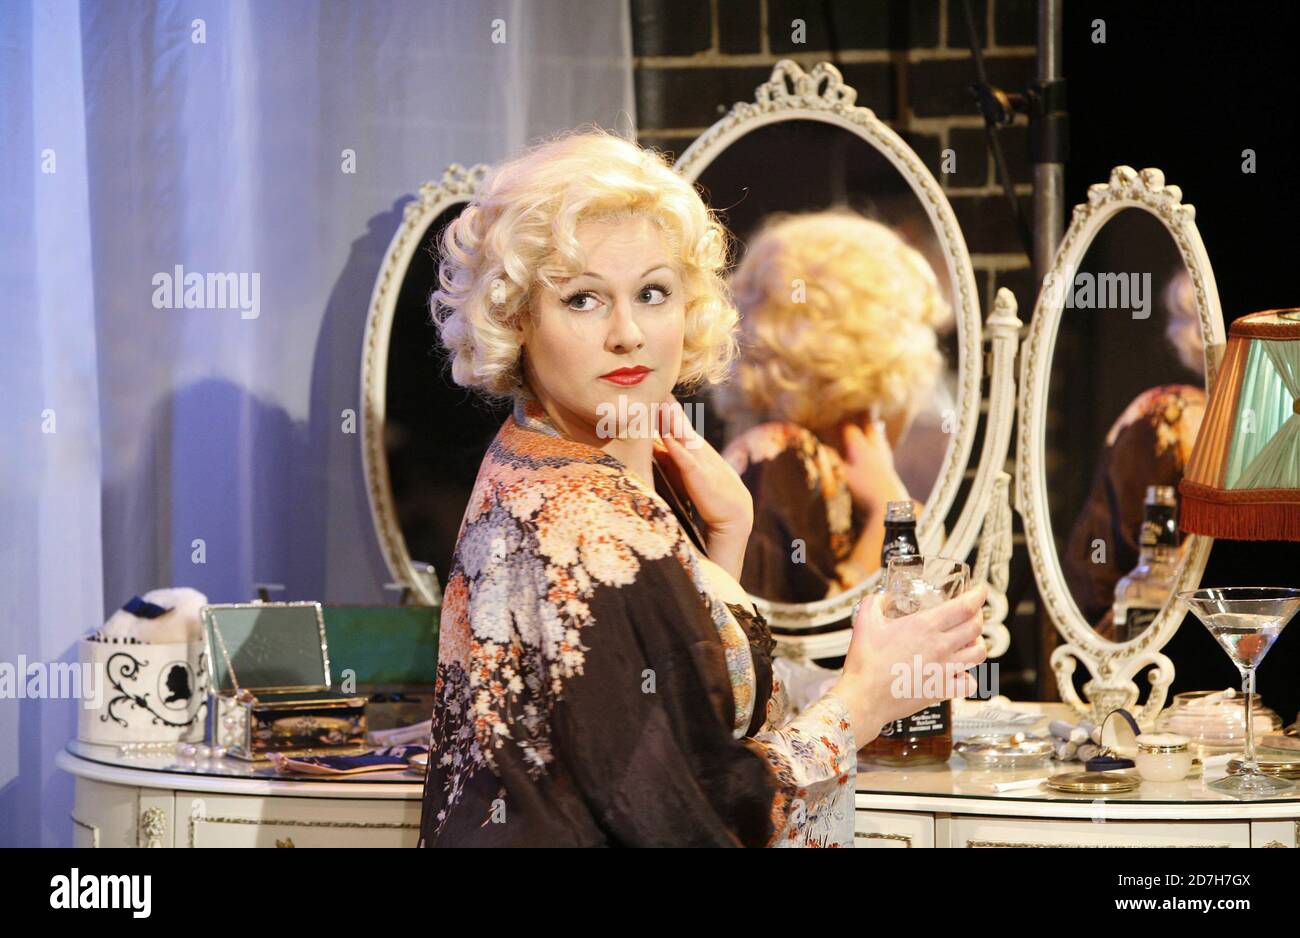 Abi Titmuss (Angie) in 'Some Kind Of Love Story' : Act 1 of  TWO-WAY MIRROR  by Arthur Miller at The Courtyard at Covent Garden, Theatre Museum, London  02/03/2006  design: Roy Bell  lighting: Chris Corner  director: Mike Miller Stock Photo